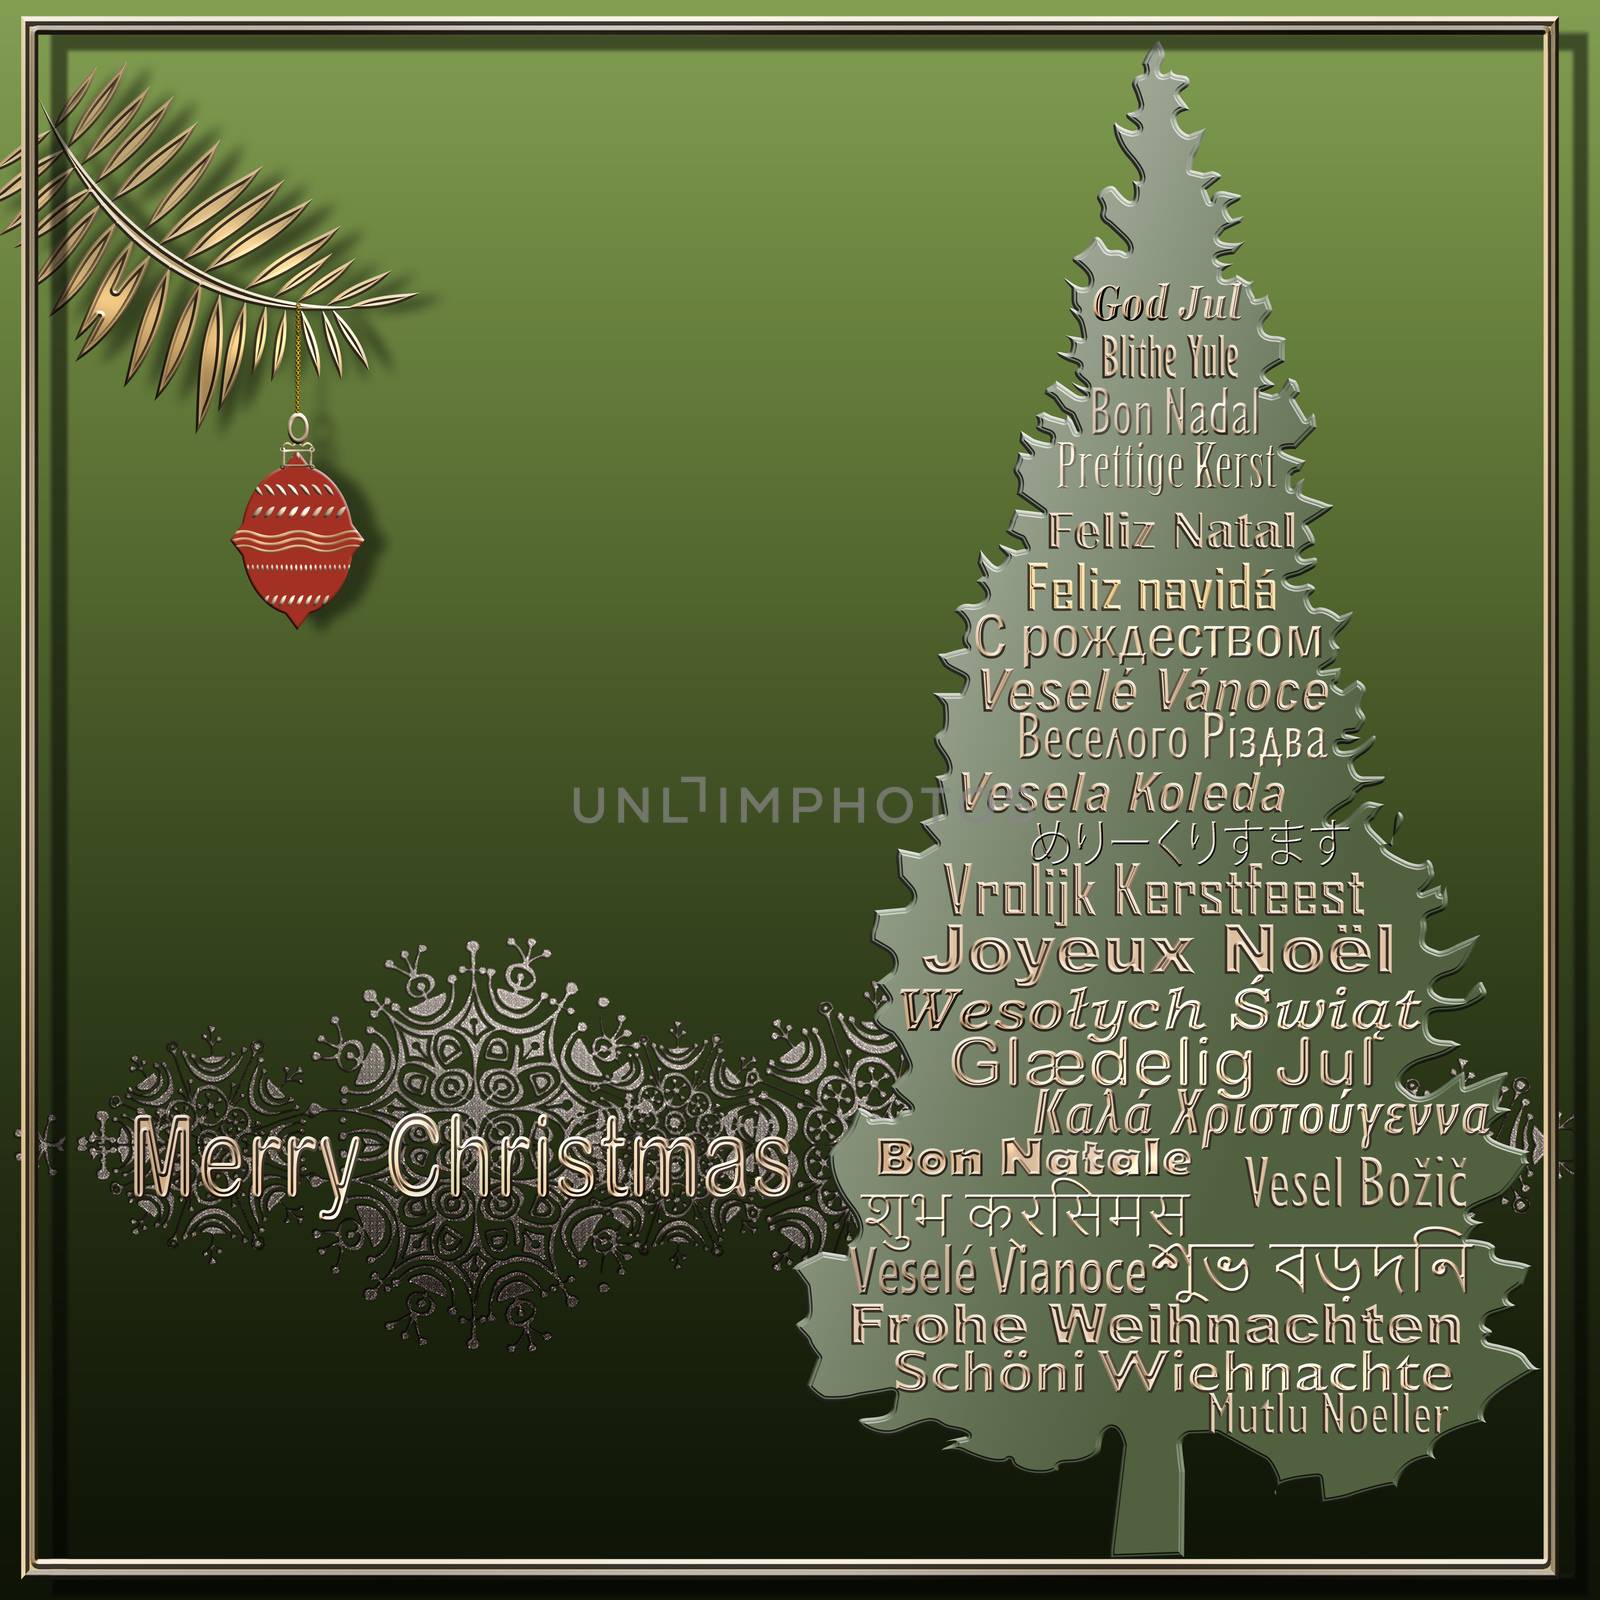 Christmas card with text Merry Christmas in European, Eastern European, Hindi, Bengali, Indian, Japanese languages, hanging red ball on green background with silver snowflakes frame. 3D illustration